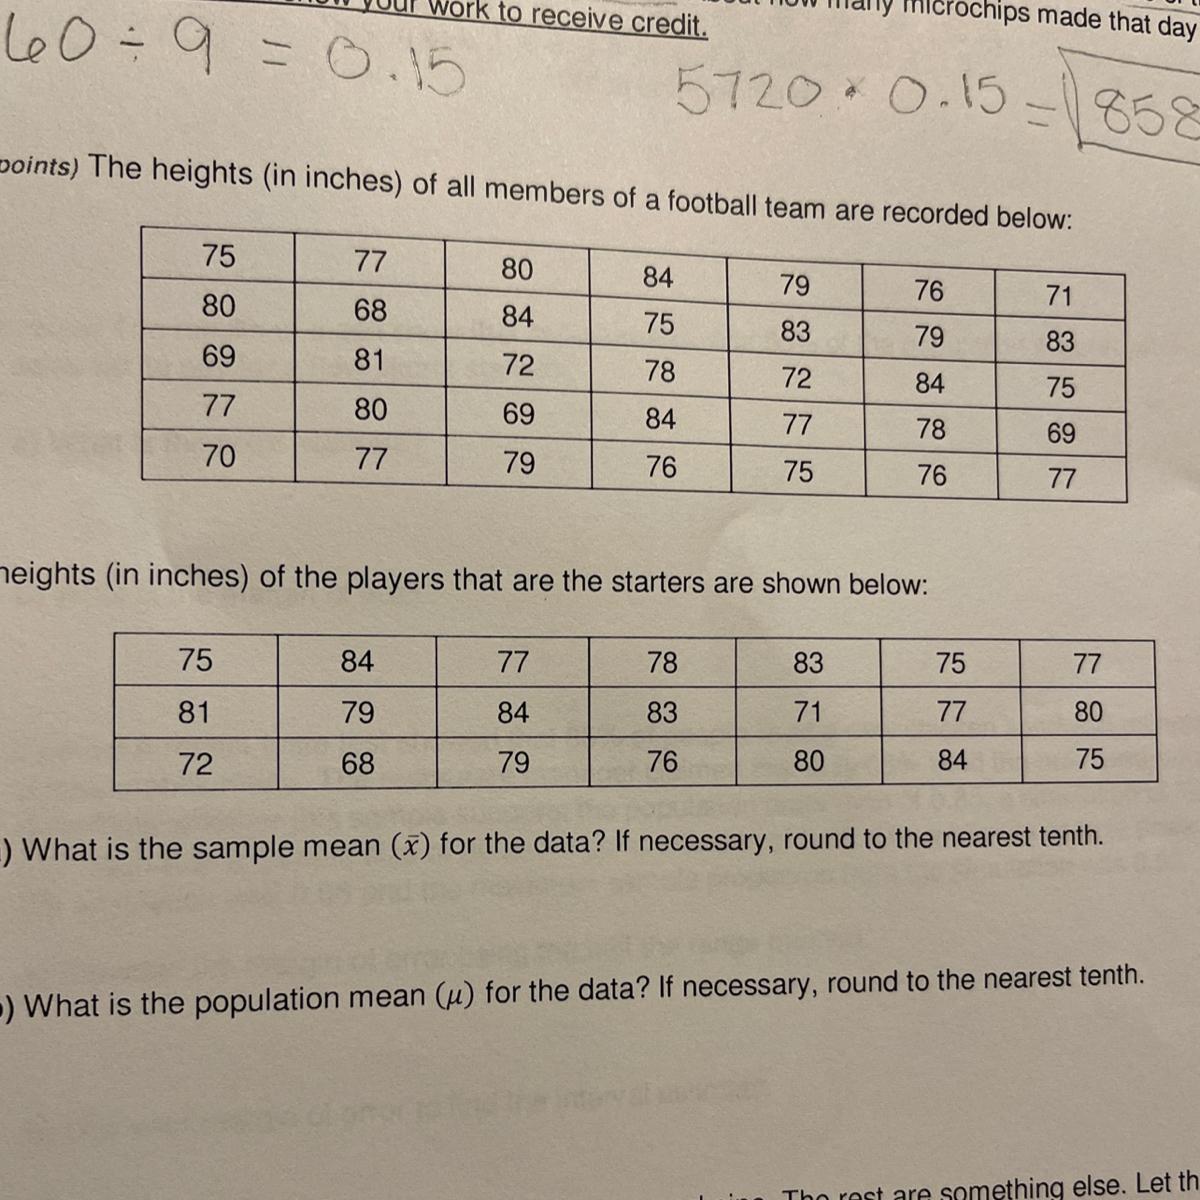 My Test Is Tomorrow And I Need Help With My Review Please!